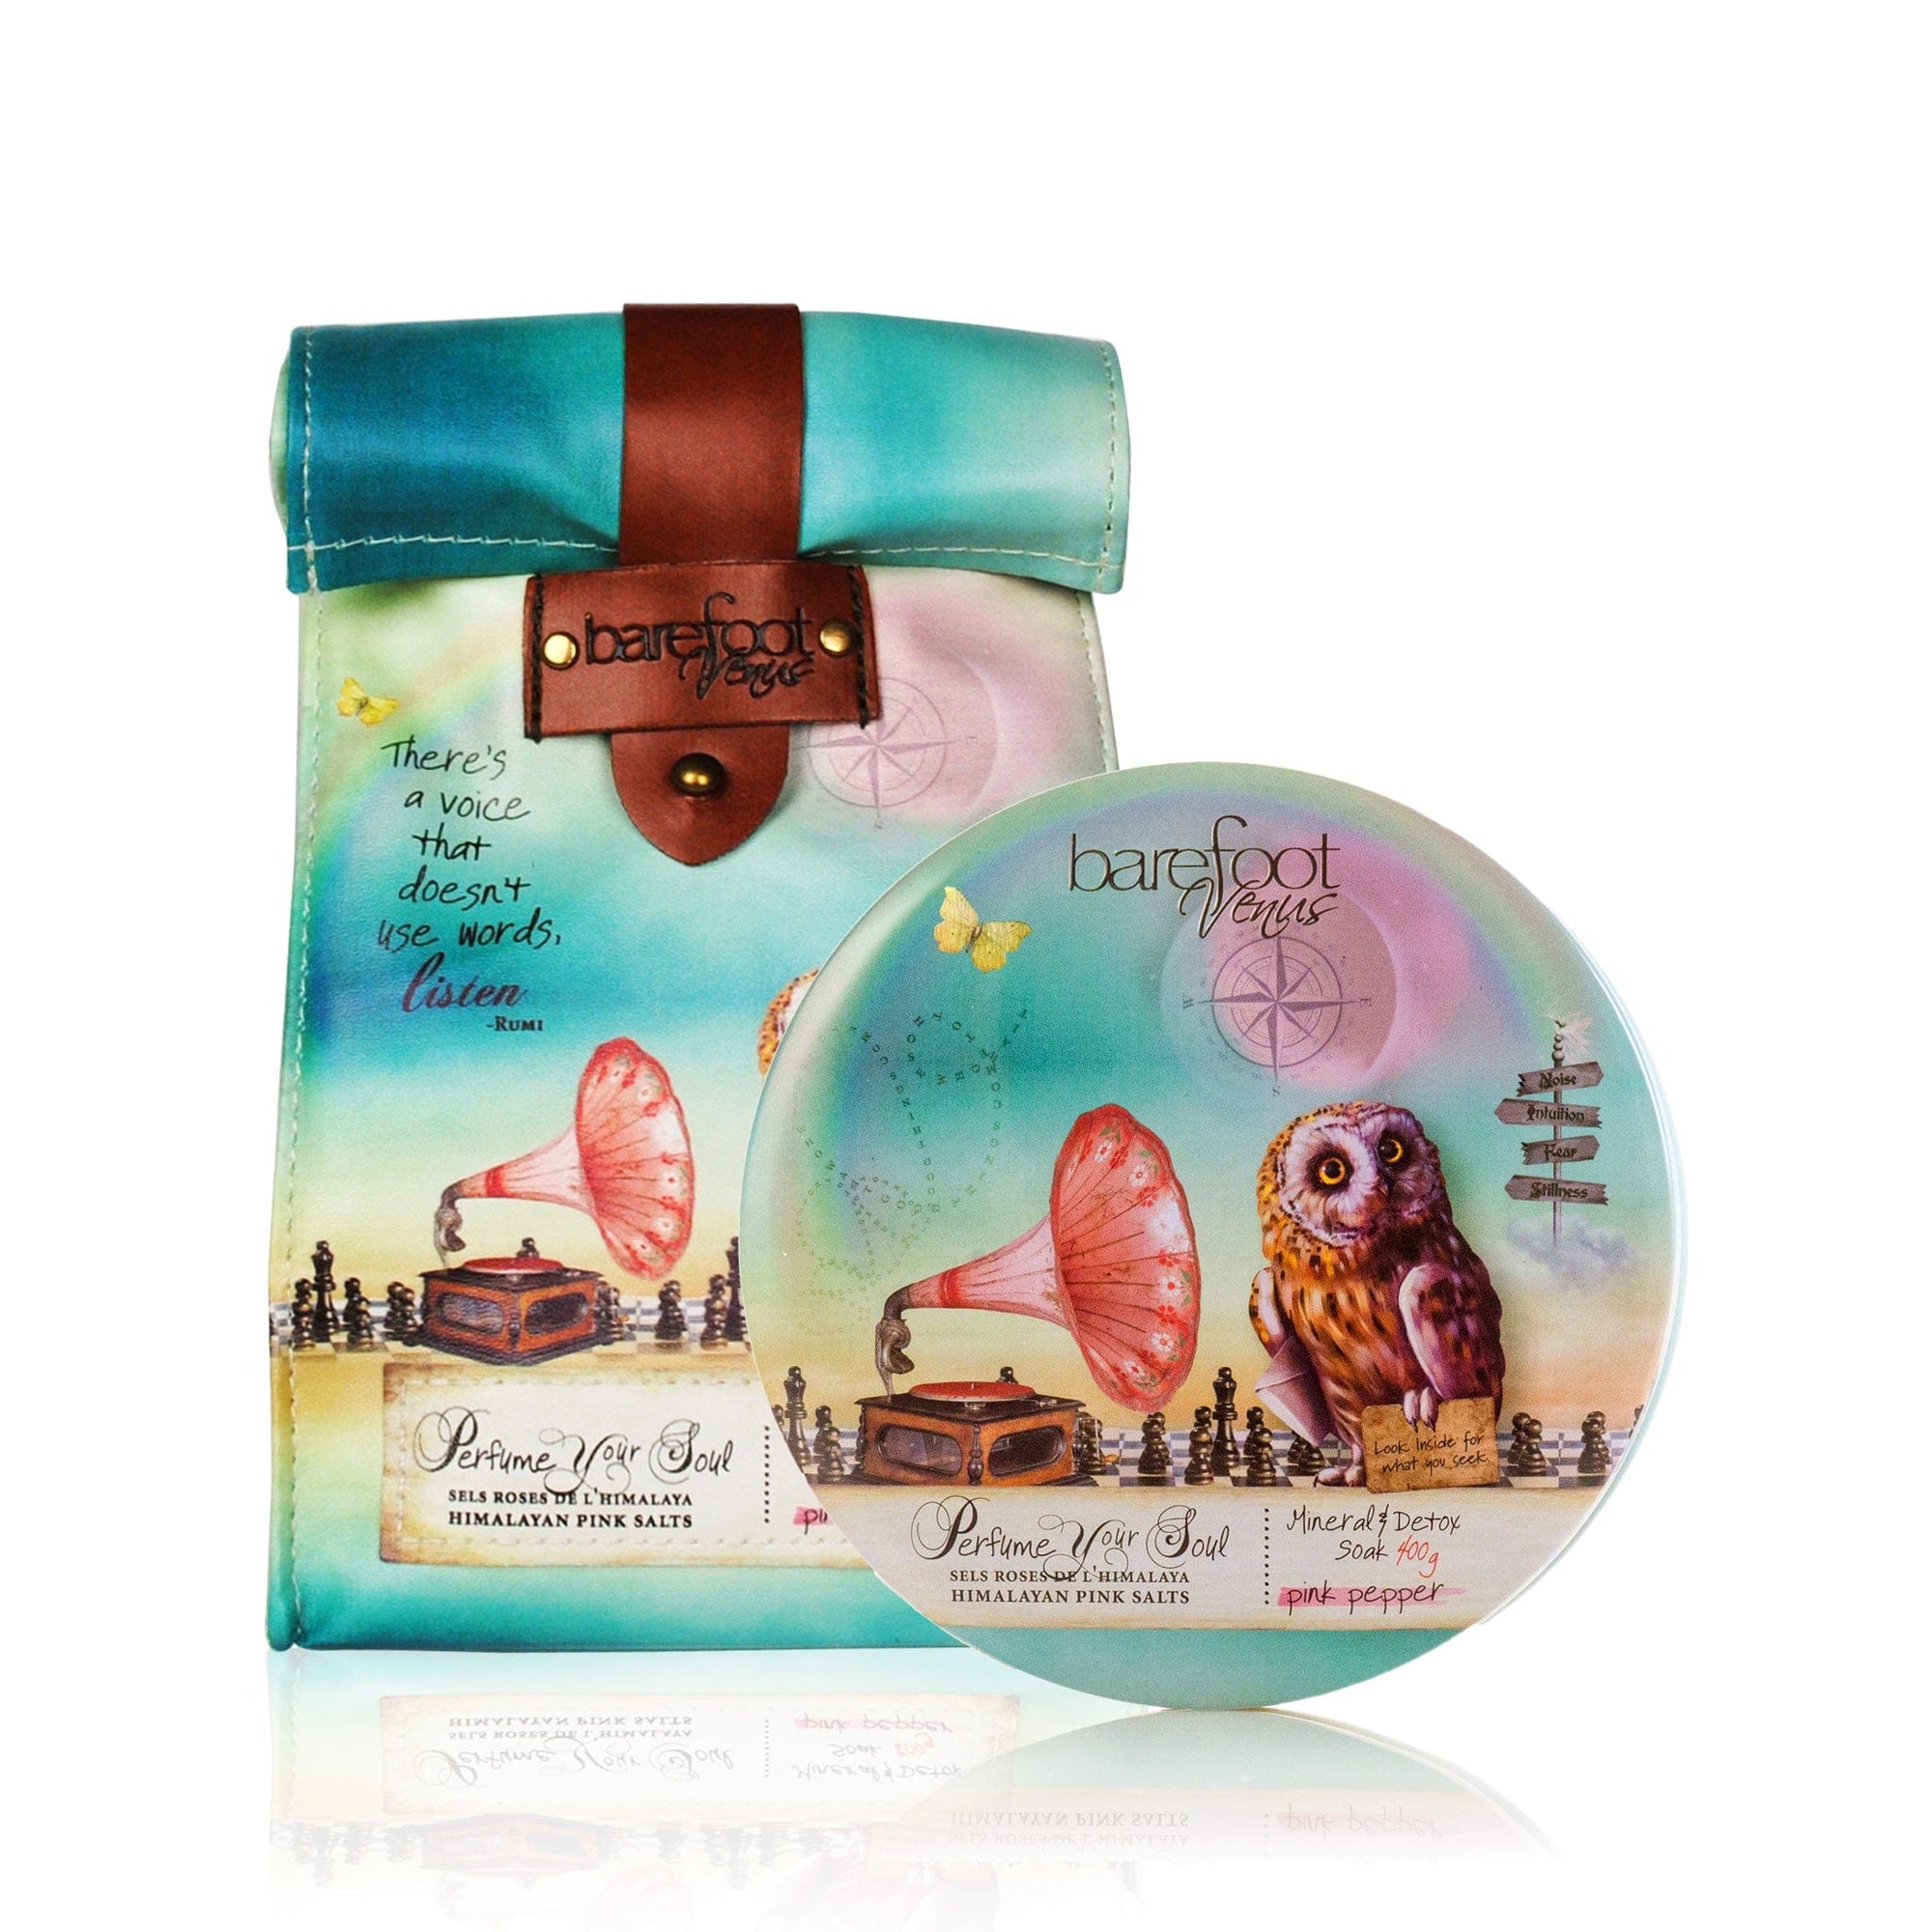 Whimsical Tin & Refill Bag AROMATIC BLEND OF MINERAL-RICH SALTS Barefoot Venus